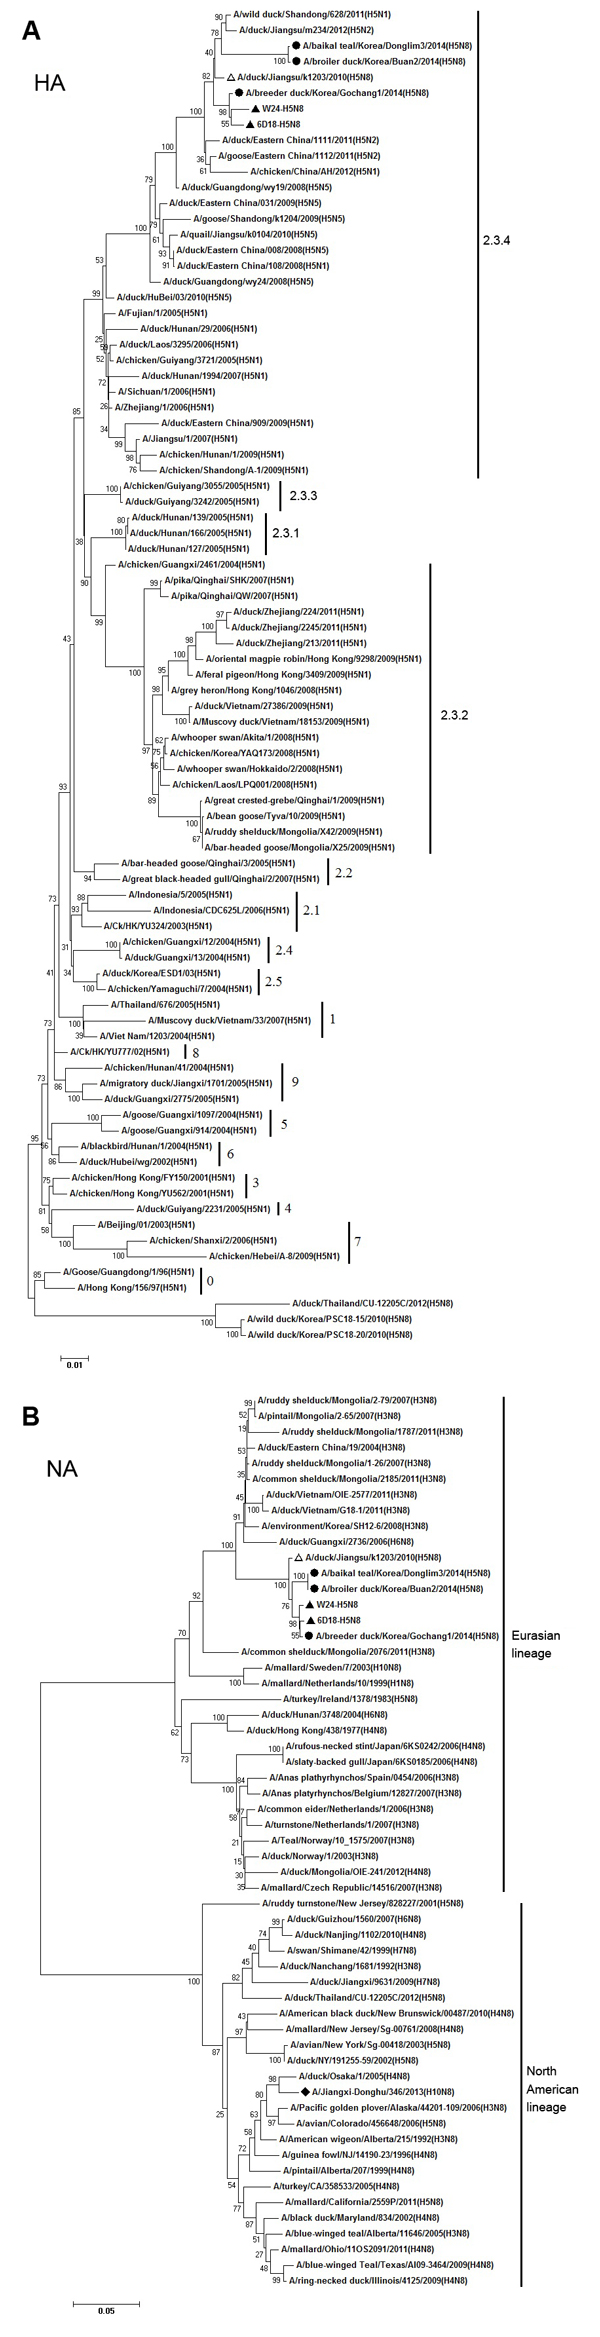 Phylogenetic analysis of A) hemagglutinin (HA) (nucleotide positions 9–1647) and B) neuraminidase (NA) (nucleotide positions 44–1381) genes of novel influenza A(H5N8) viruses isolated from domestic ducks, eastern China, 2013, and other influenza viruses. The tree was created by the using the neighbor-joining method and bootstrapped with 1,000 replicates by using MEGA 5.05 (http://www.megasoftware.net/). Influenza A(H5N8) viruses from China identified in this study are indicated by solid triangle